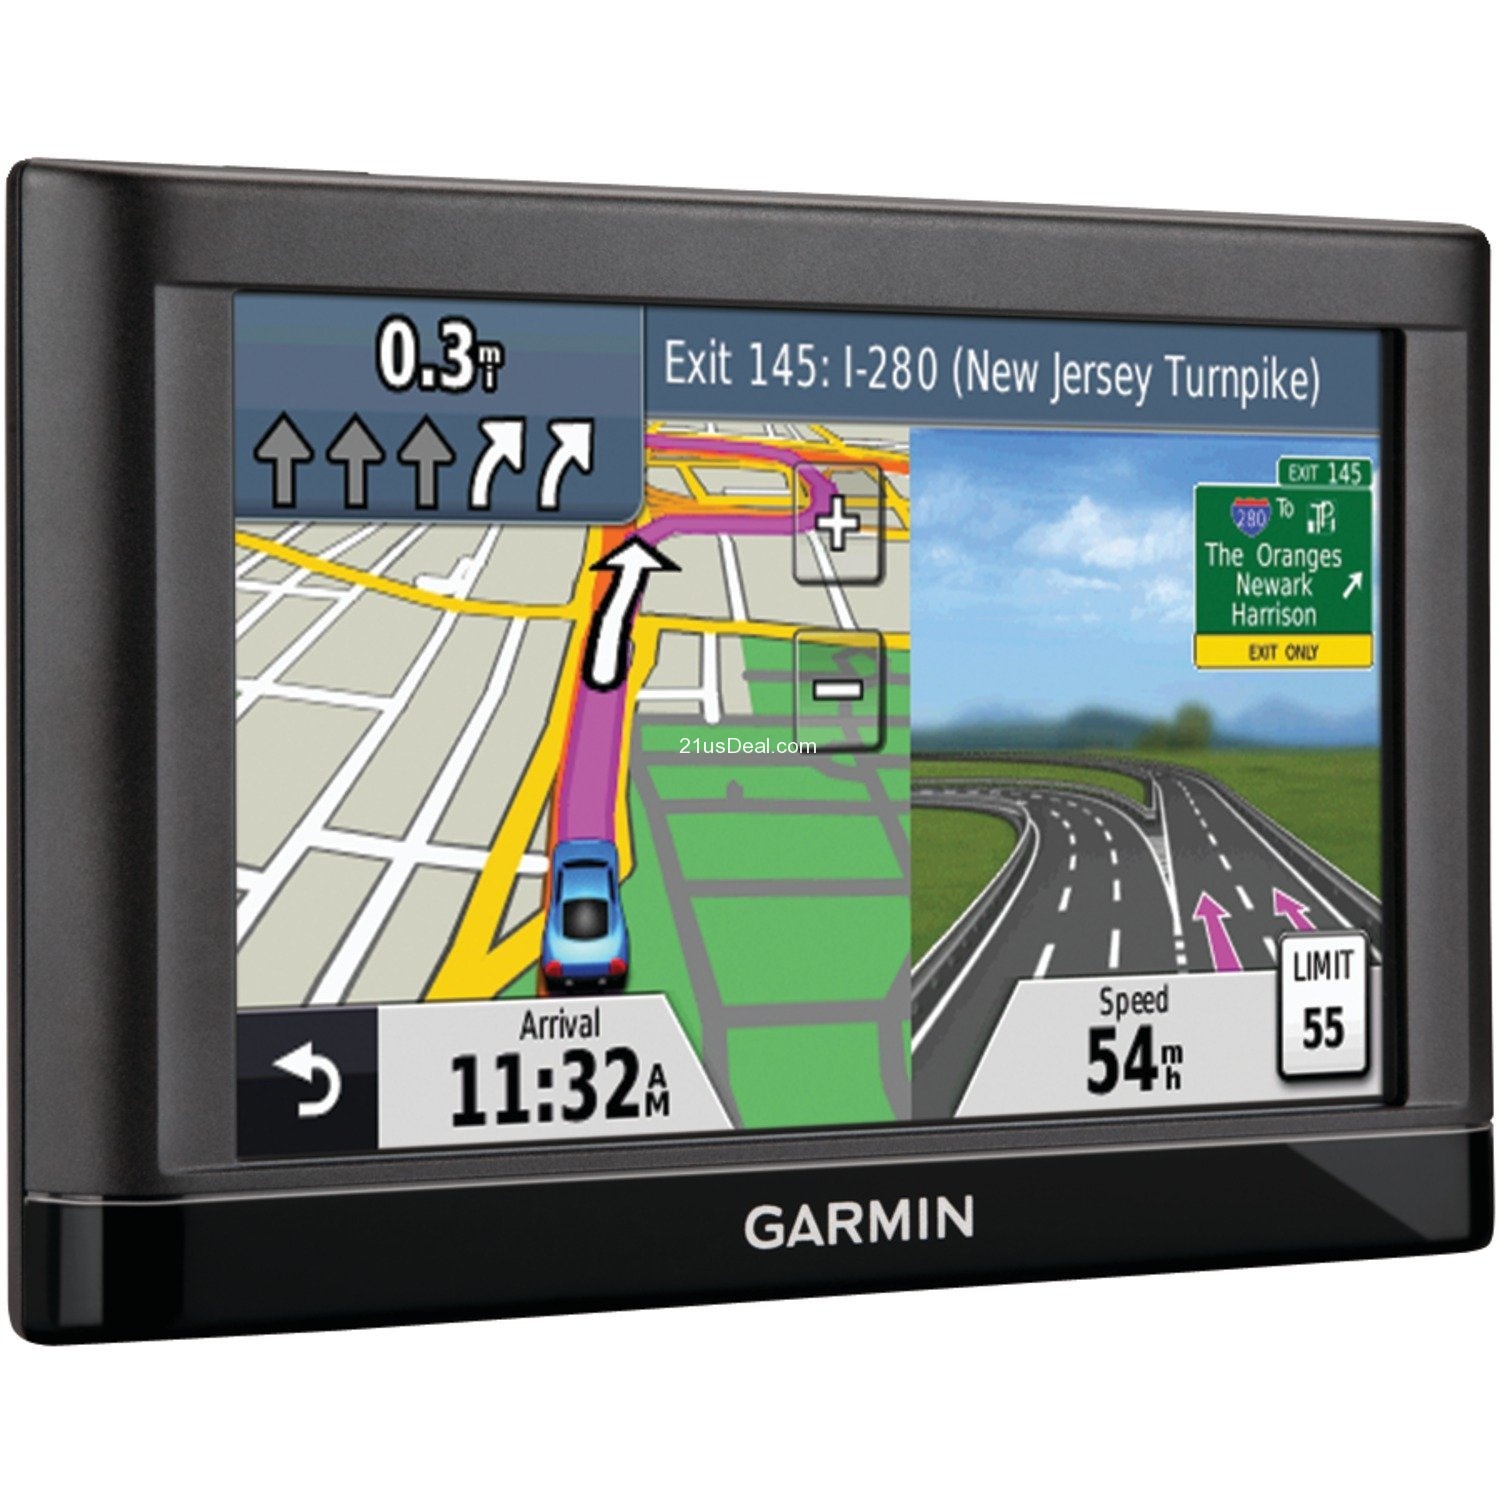 Garmin nüvi 52LM 5-Inch Portable Vehicle GPS with Lifetime Maps (US), only $79.99 , free shipping